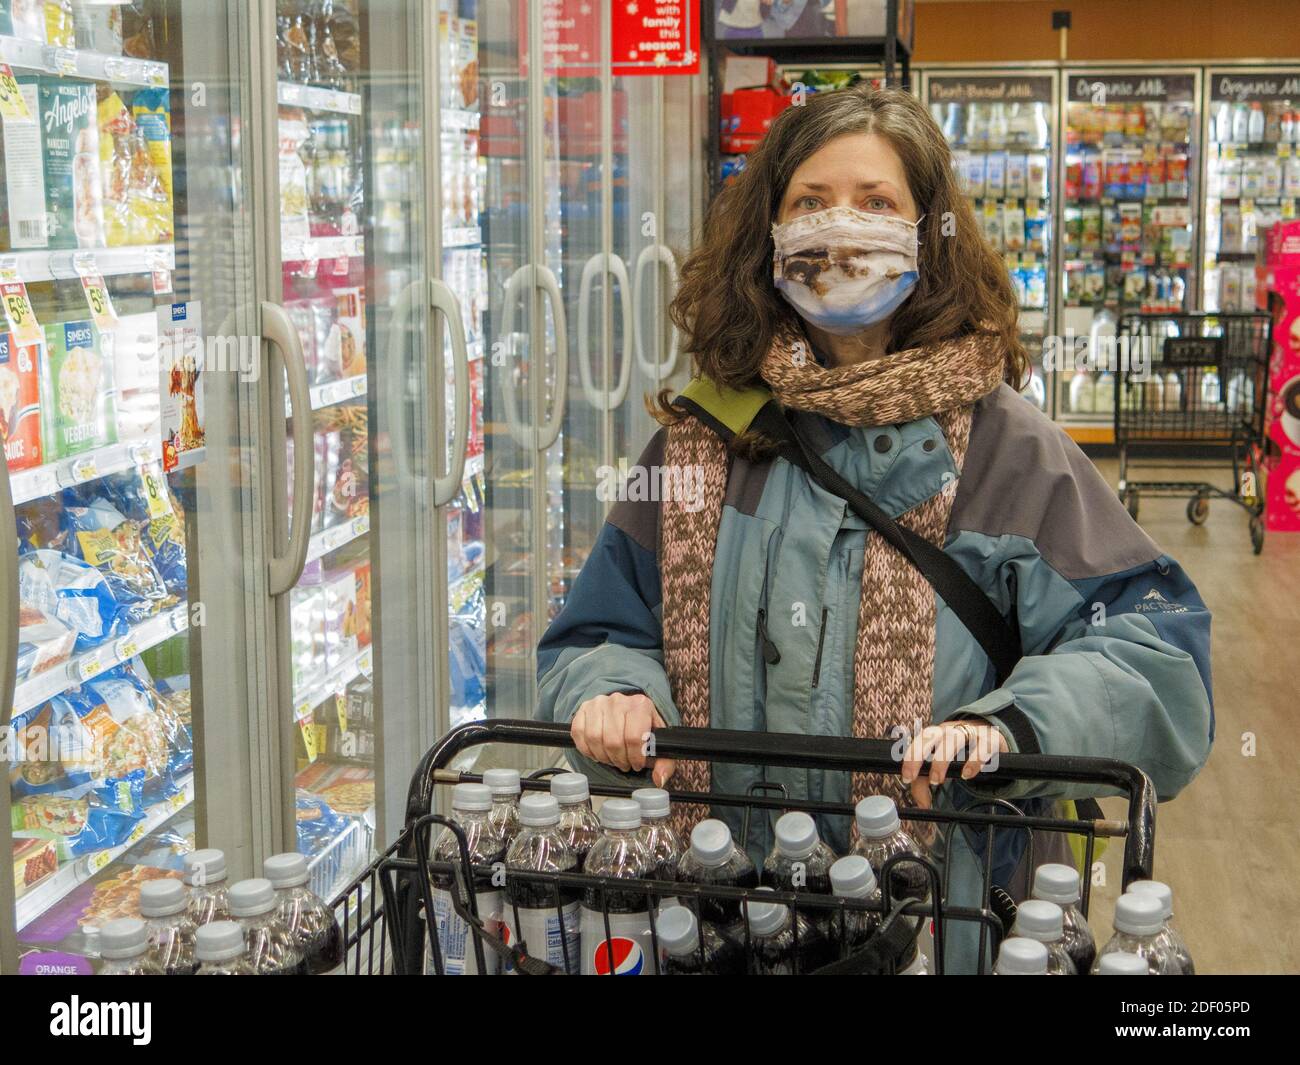 Woman wearing face mask while grocery shopping during COVID-19 pandimic. Chicago area, Illinois. Stock Photo